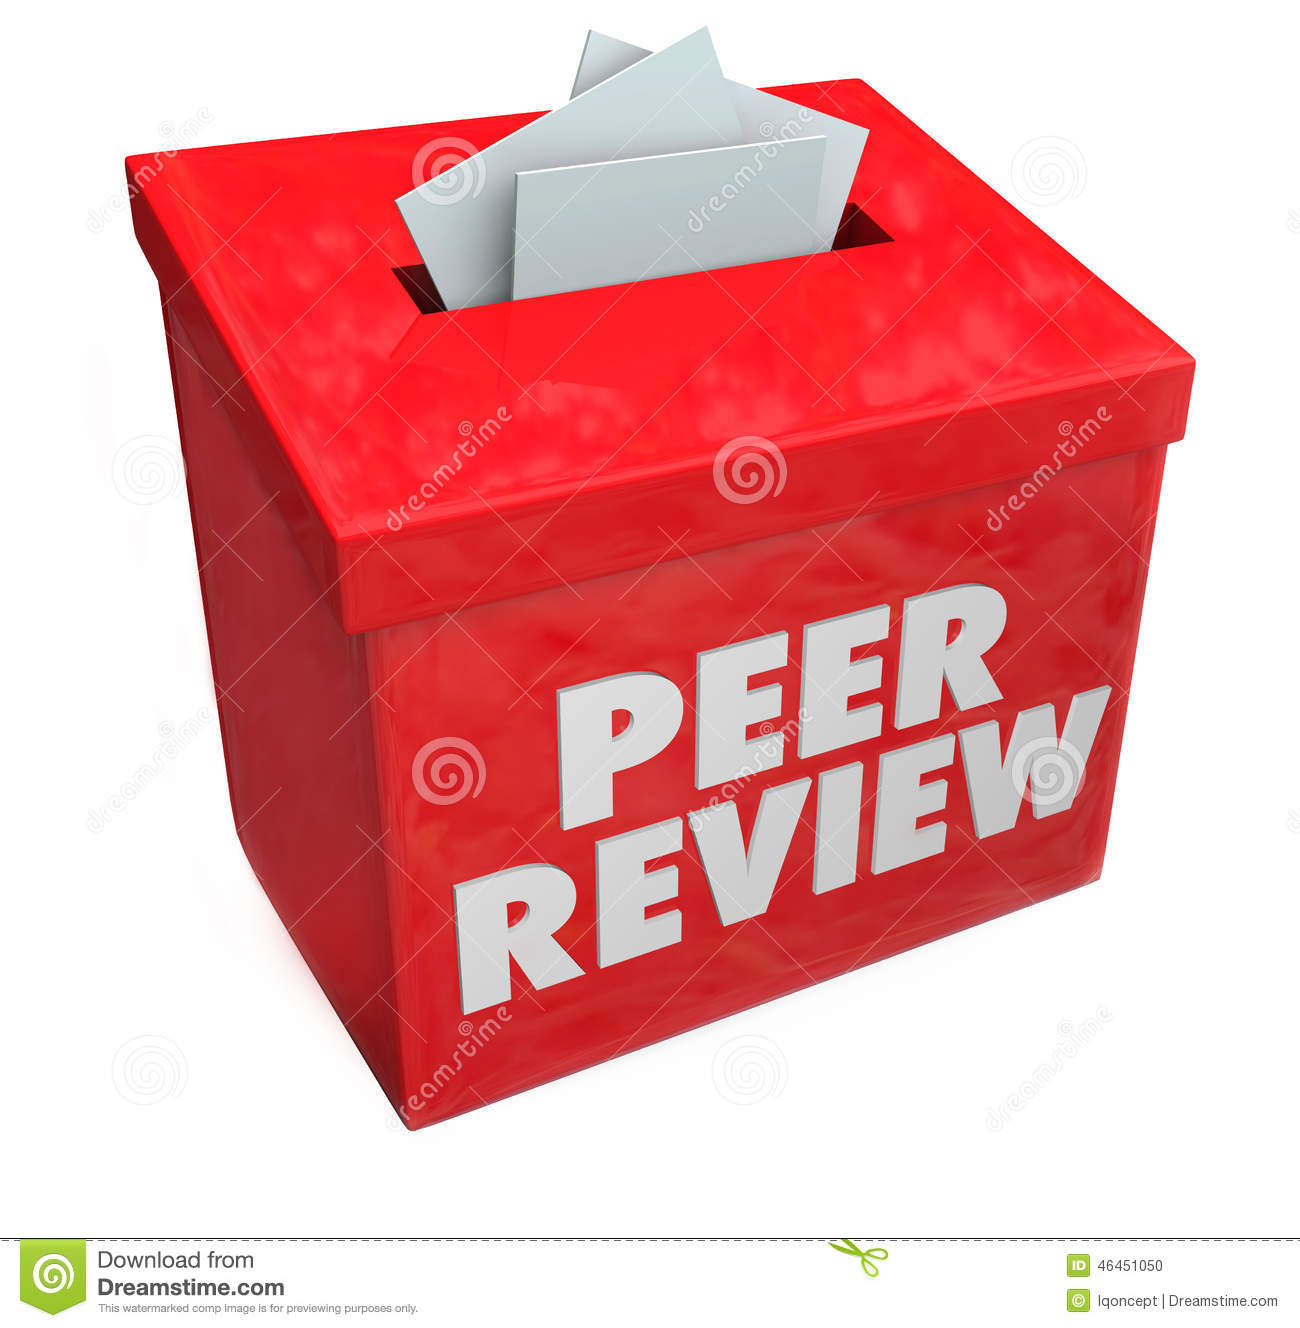 Peer Review Words In 3d Letters On A Red Box Collecting Evaluations    